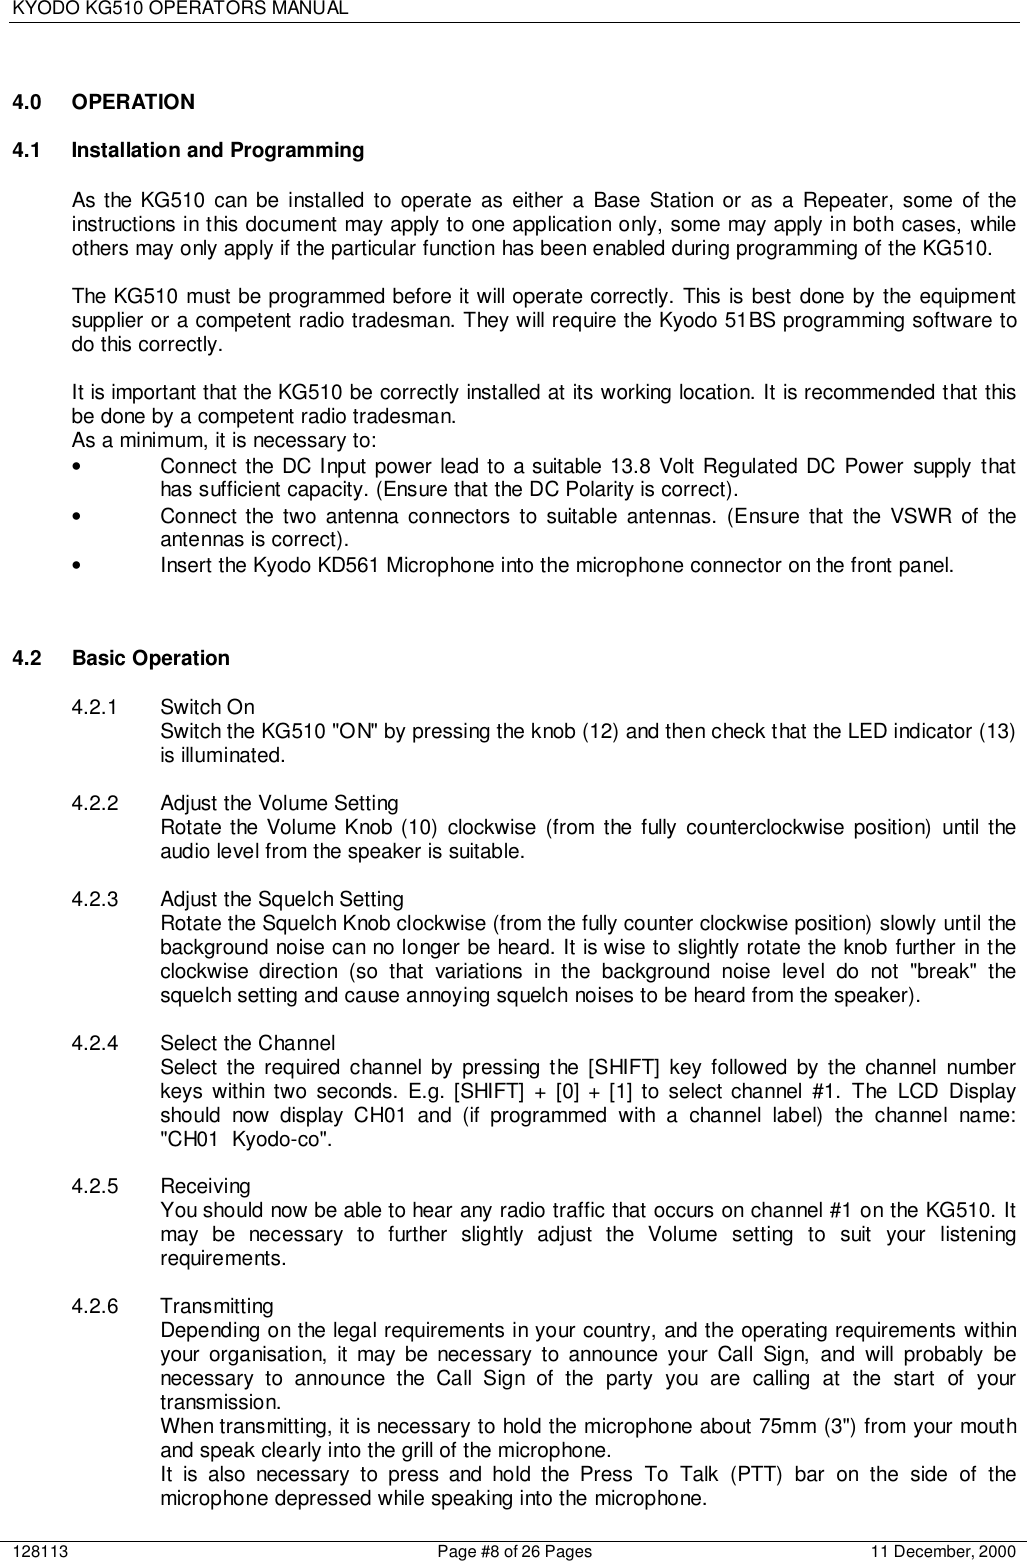 KYODO KG510 OPERATORS MANUAL128113 Page #8 of 26 Pages 11 December, 20004.0 OPERATION4.1  Installation and ProgrammingAs the KG510 can be installed to operate as either a Base Station or as a Repeater, some of theinstructions in this document may apply to one application only, some may apply in both cases, whileothers may only apply if the particular function has been enabled during programming of the KG510.The KG510 must be programmed before it will operate correctly. This is best done by the equipmentsupplier or a competent radio tradesman. They will require the Kyodo 51BS programming software todo this correctly.It is important that the KG510 be correctly installed at its working location. It is recommended that thisbe done by a competent radio tradesman.As a minimum, it is necessary to:•  Connect the DC Input power lead to a suitable 13.8 Volt Regulated DC Power supply thathas sufficient capacity. (Ensure that the DC Polarity is correct).•  Connect the two antenna connectors to suitable antennas. (Ensure that the VSWR of theantennas is correct).•  Insert the Kyodo KD561 Microphone into the microphone connector on the front panel.4.2 Basic Operation4.2.1 Switch OnSwitch the KG510 &quot;ON&quot; by pressing the knob (12) and then check that the LED indicator (13)is illuminated.4.2.2  Adjust the Volume SettingRotate the Volume Knob (10) clockwise (from the fully counterclockwise position) until theaudio level from the speaker is suitable.4.2.3 Adjust the Squelch SettingRotate the Squelch Knob clockwise (from the fully counter clockwise position) slowly until thebackground noise can no longer be heard. It is wise to slightly rotate the knob further in theclockwise direction (so that variations in the background noise level do not &quot;break&quot; thesquelch setting and cause annoying squelch noises to be heard from the speaker).4.2.4 Select the ChannelSelect the required channel by pressing the [SHIFT] key followed by the channel numberkeys within two seconds. E.g. [SHIFT] + [0] + [1] to select channel #1. The LCD Displayshould now display CH01 and (if programmed with a channel label) the channel name:&quot;CH01  Kyodo-co&quot;.4.2.5 ReceivingYou should now be able to hear any radio traffic that occurs on channel #1 on the KG510. Itmay be necessary to further slightly adjust the Volume setting to suit your listeningrequirements.4.2.6 TransmittingDepending on the legal requirements in your country, and the operating requirements withinyour organisation, it may be necessary to announce your Call Sign, and will probably benecessary to announce the Call Sign of the party you are calling at the start of yourtransmission.When transmitting, it is necessary to hold the microphone about 75mm (3&quot;) from your mouthand speak clearly into the grill of the microphone.It is also necessary to press and hold the Press To Talk (PTT) bar on the side of themicrophone depressed while speaking into the microphone.